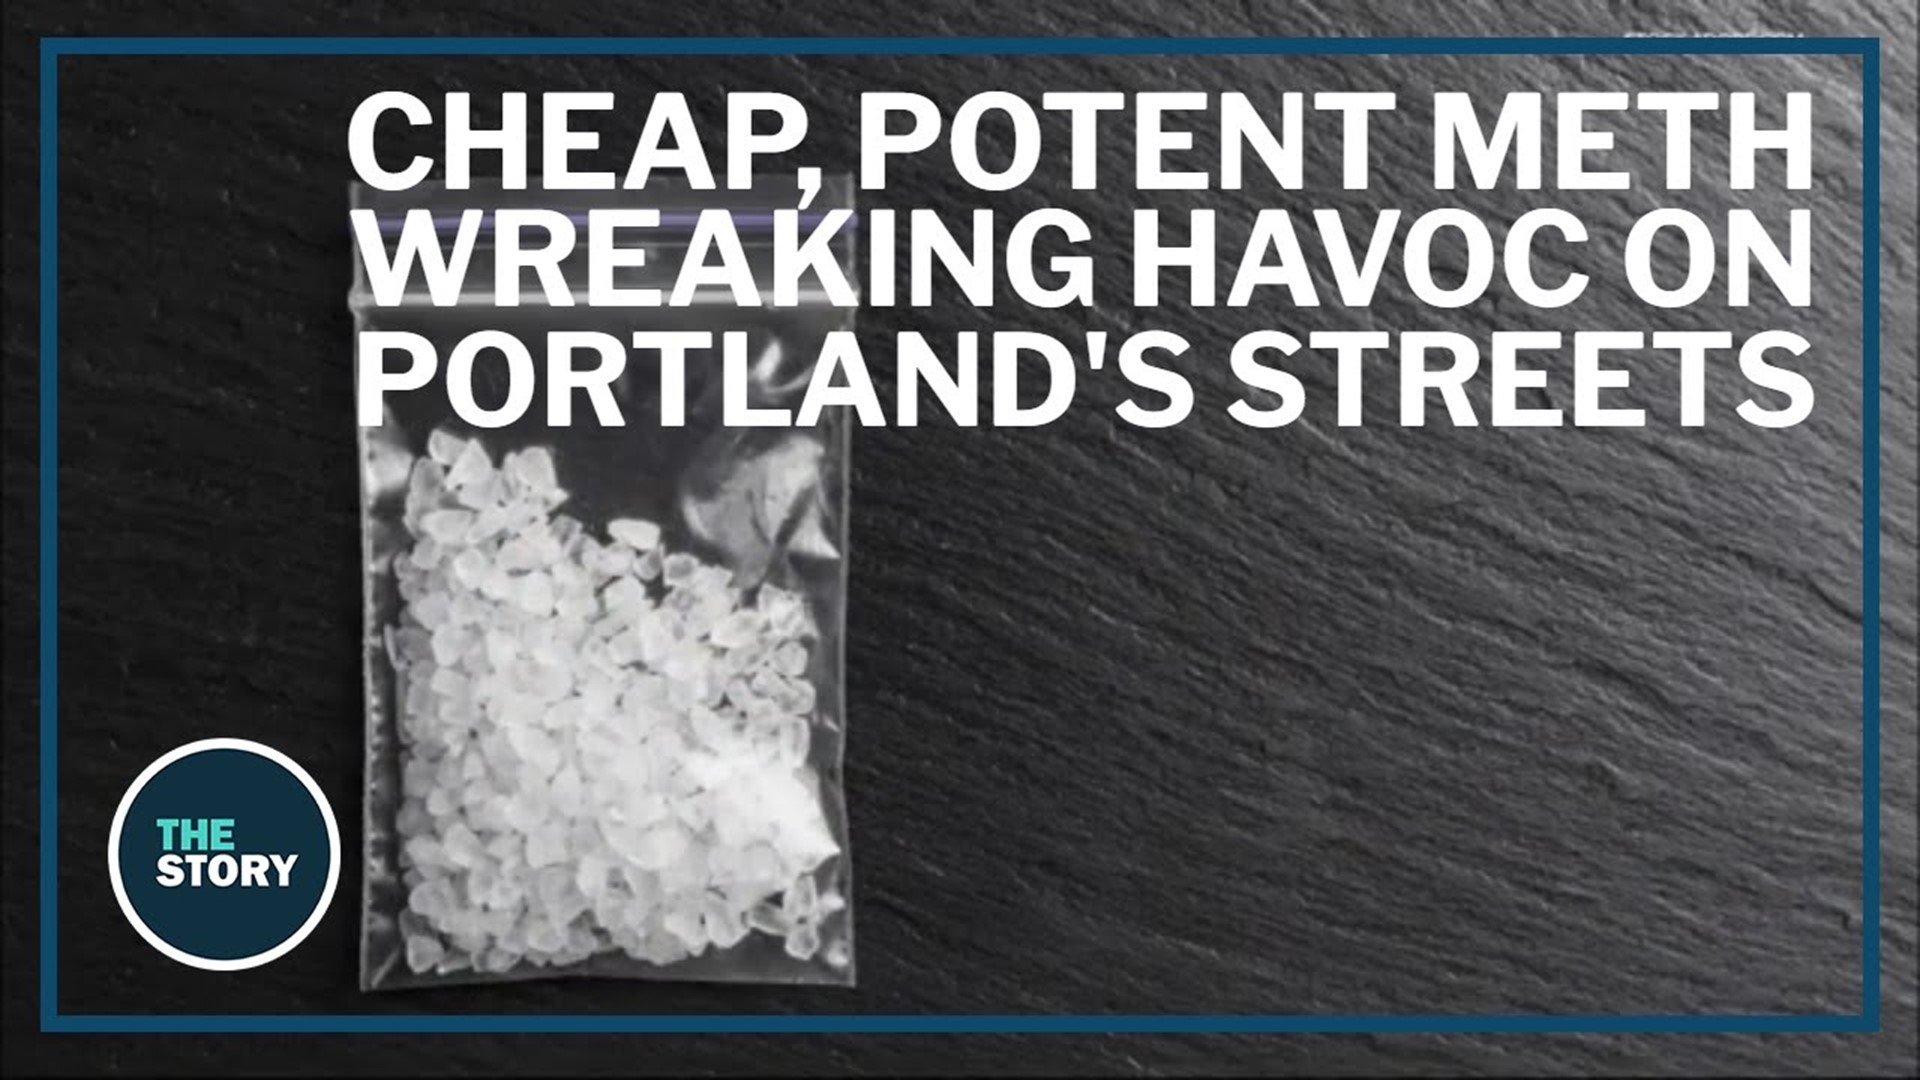 Three former users, now in recovery, talk about the potent P2P meth that is flooding Portland’s streets and what it does to people who use it.